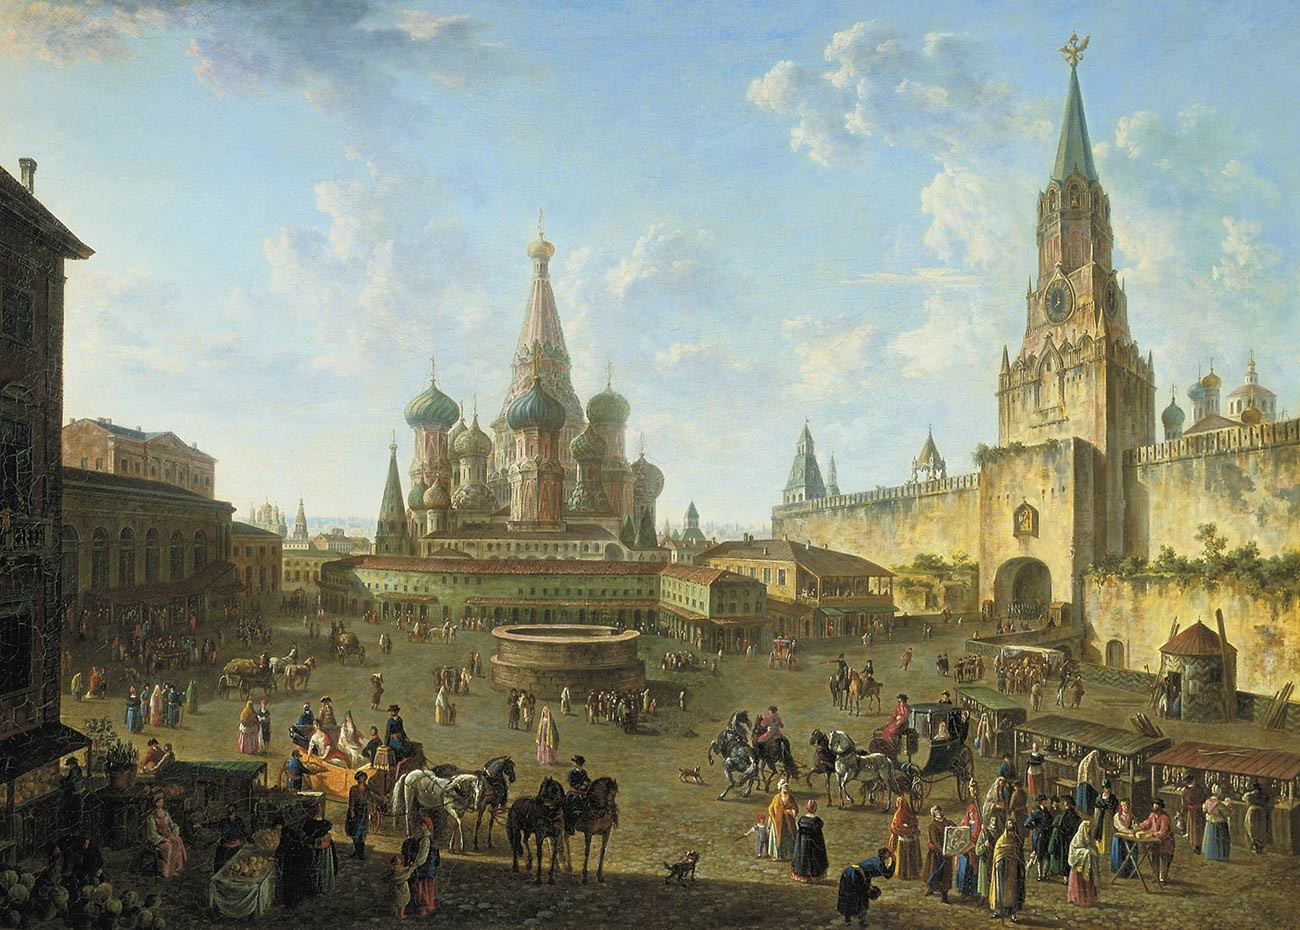 The Red Square in Moscow, 19th century, by Fedor Alekseev. To the right, the moat can still be seen – that's where lions and elephants were probably kept in the 16th century.